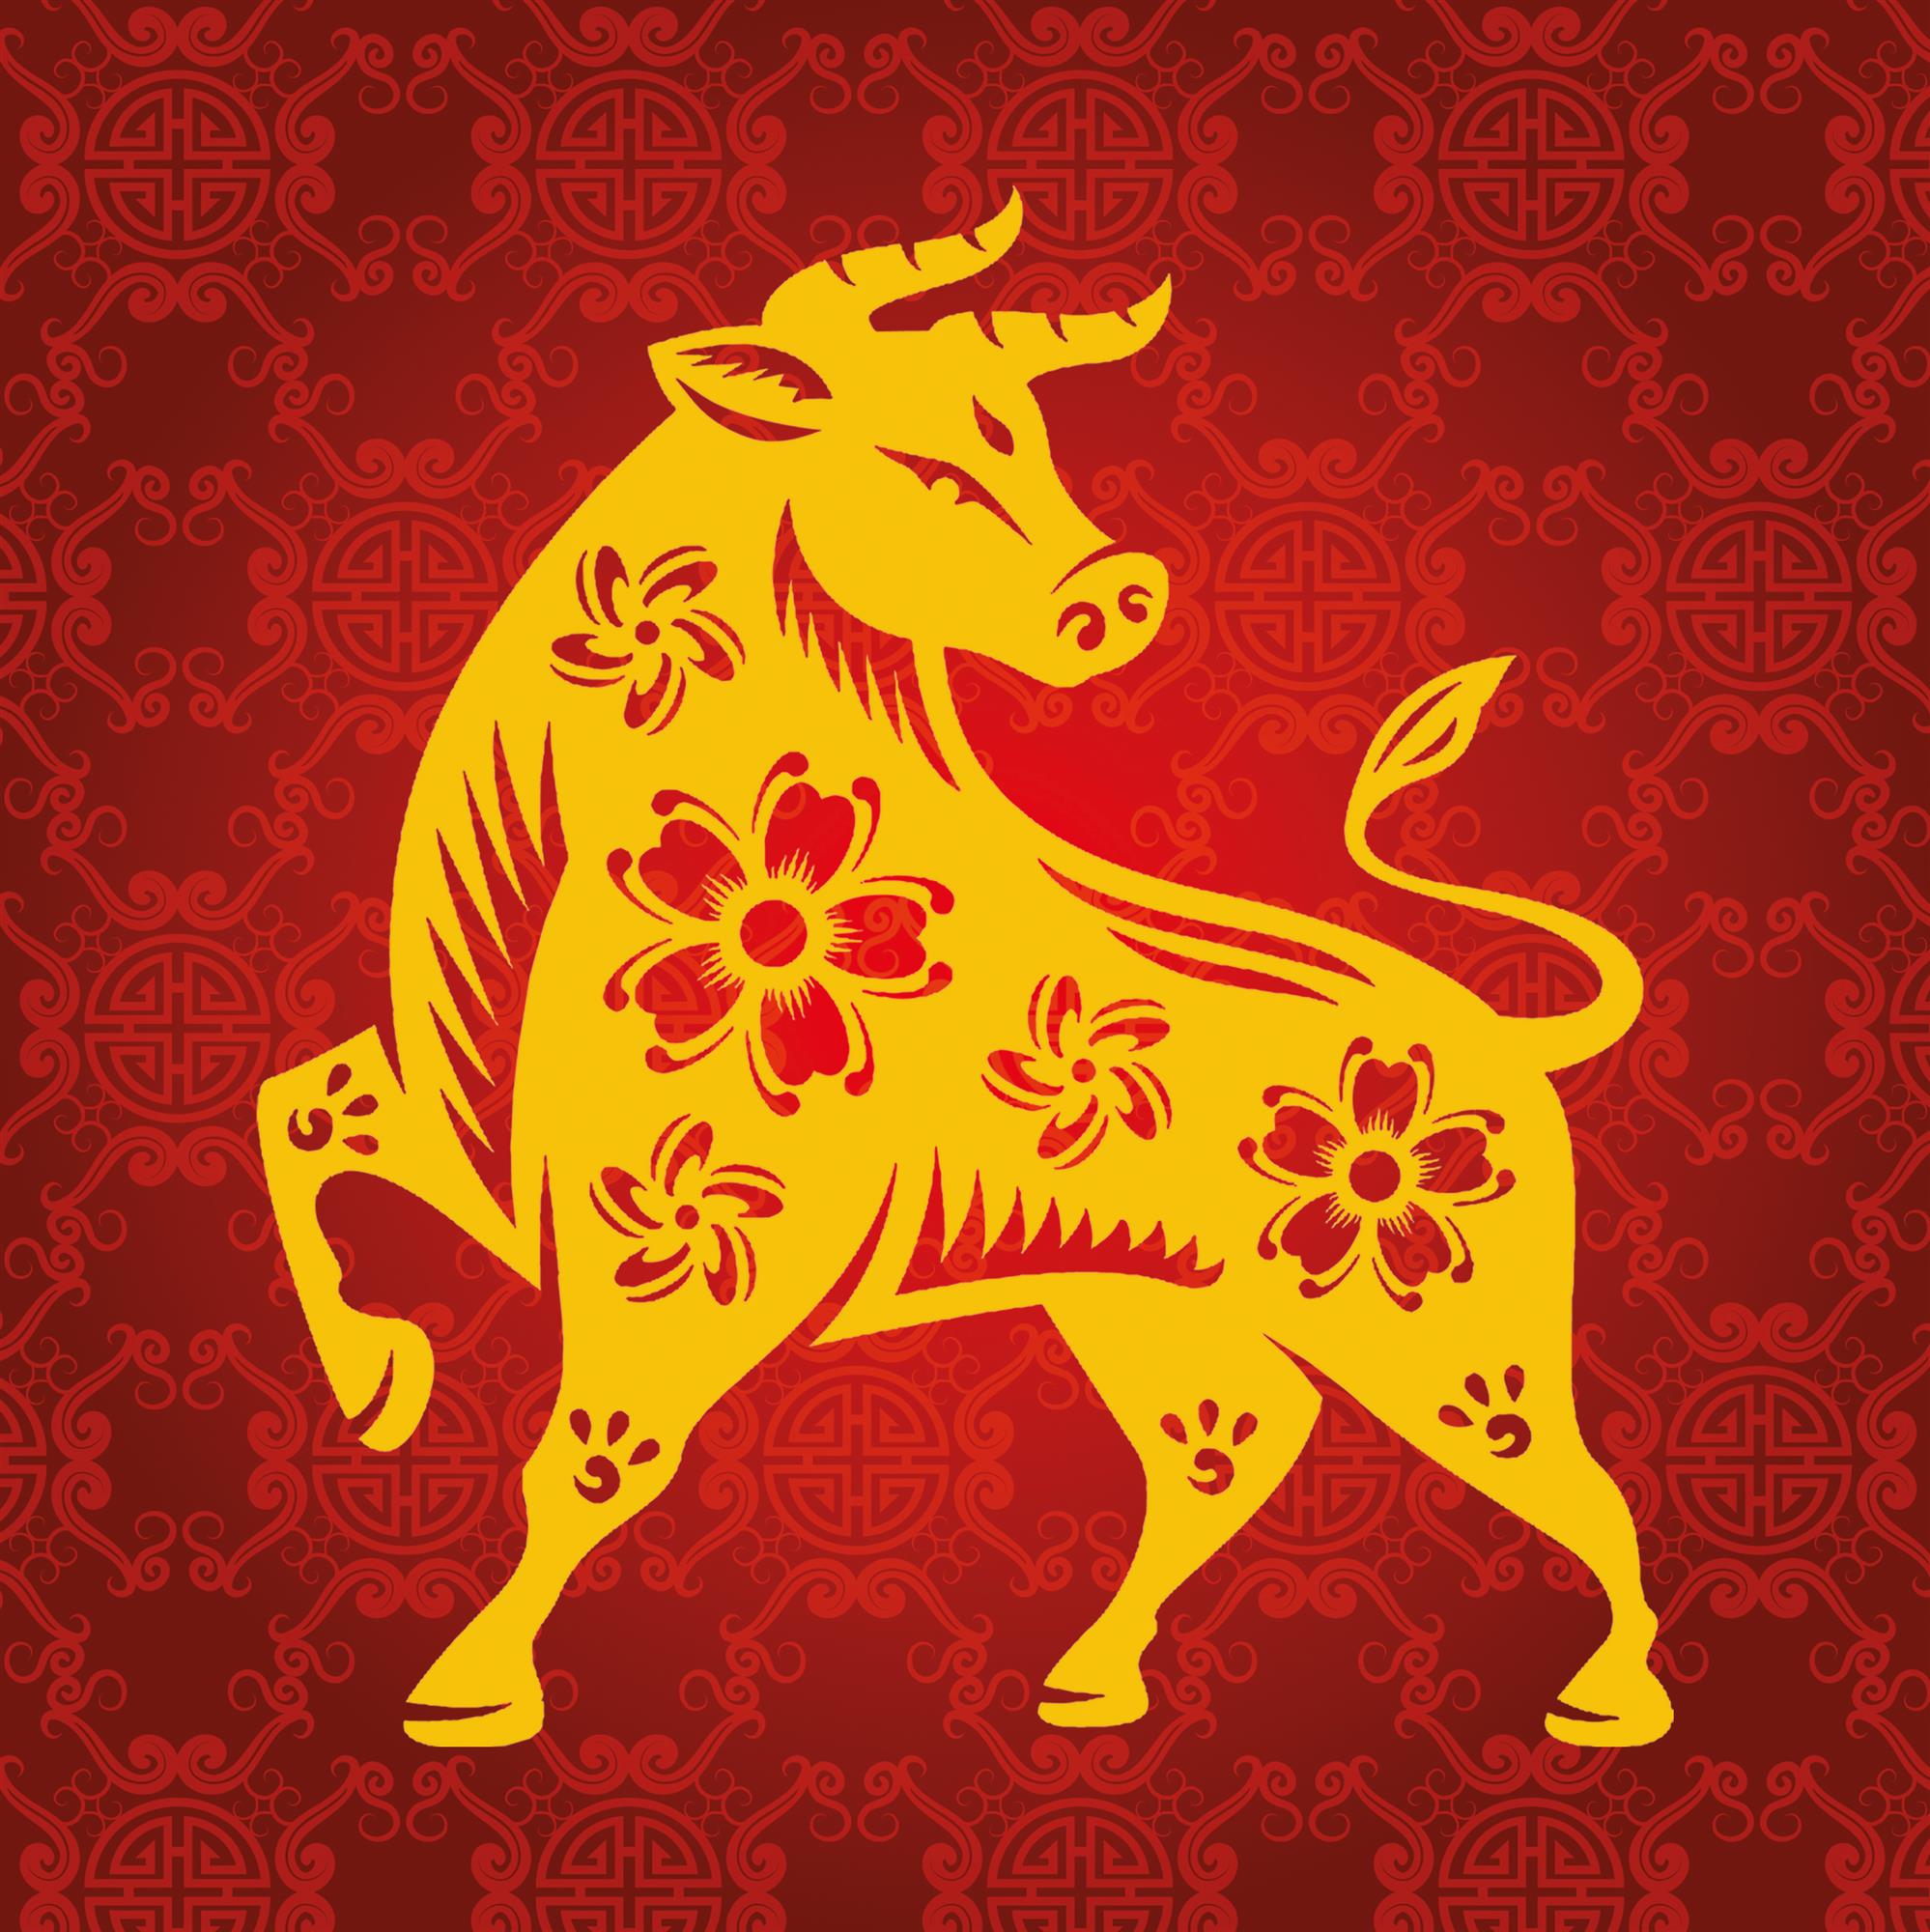 A Chinese style illustration in red and yellow of an ox